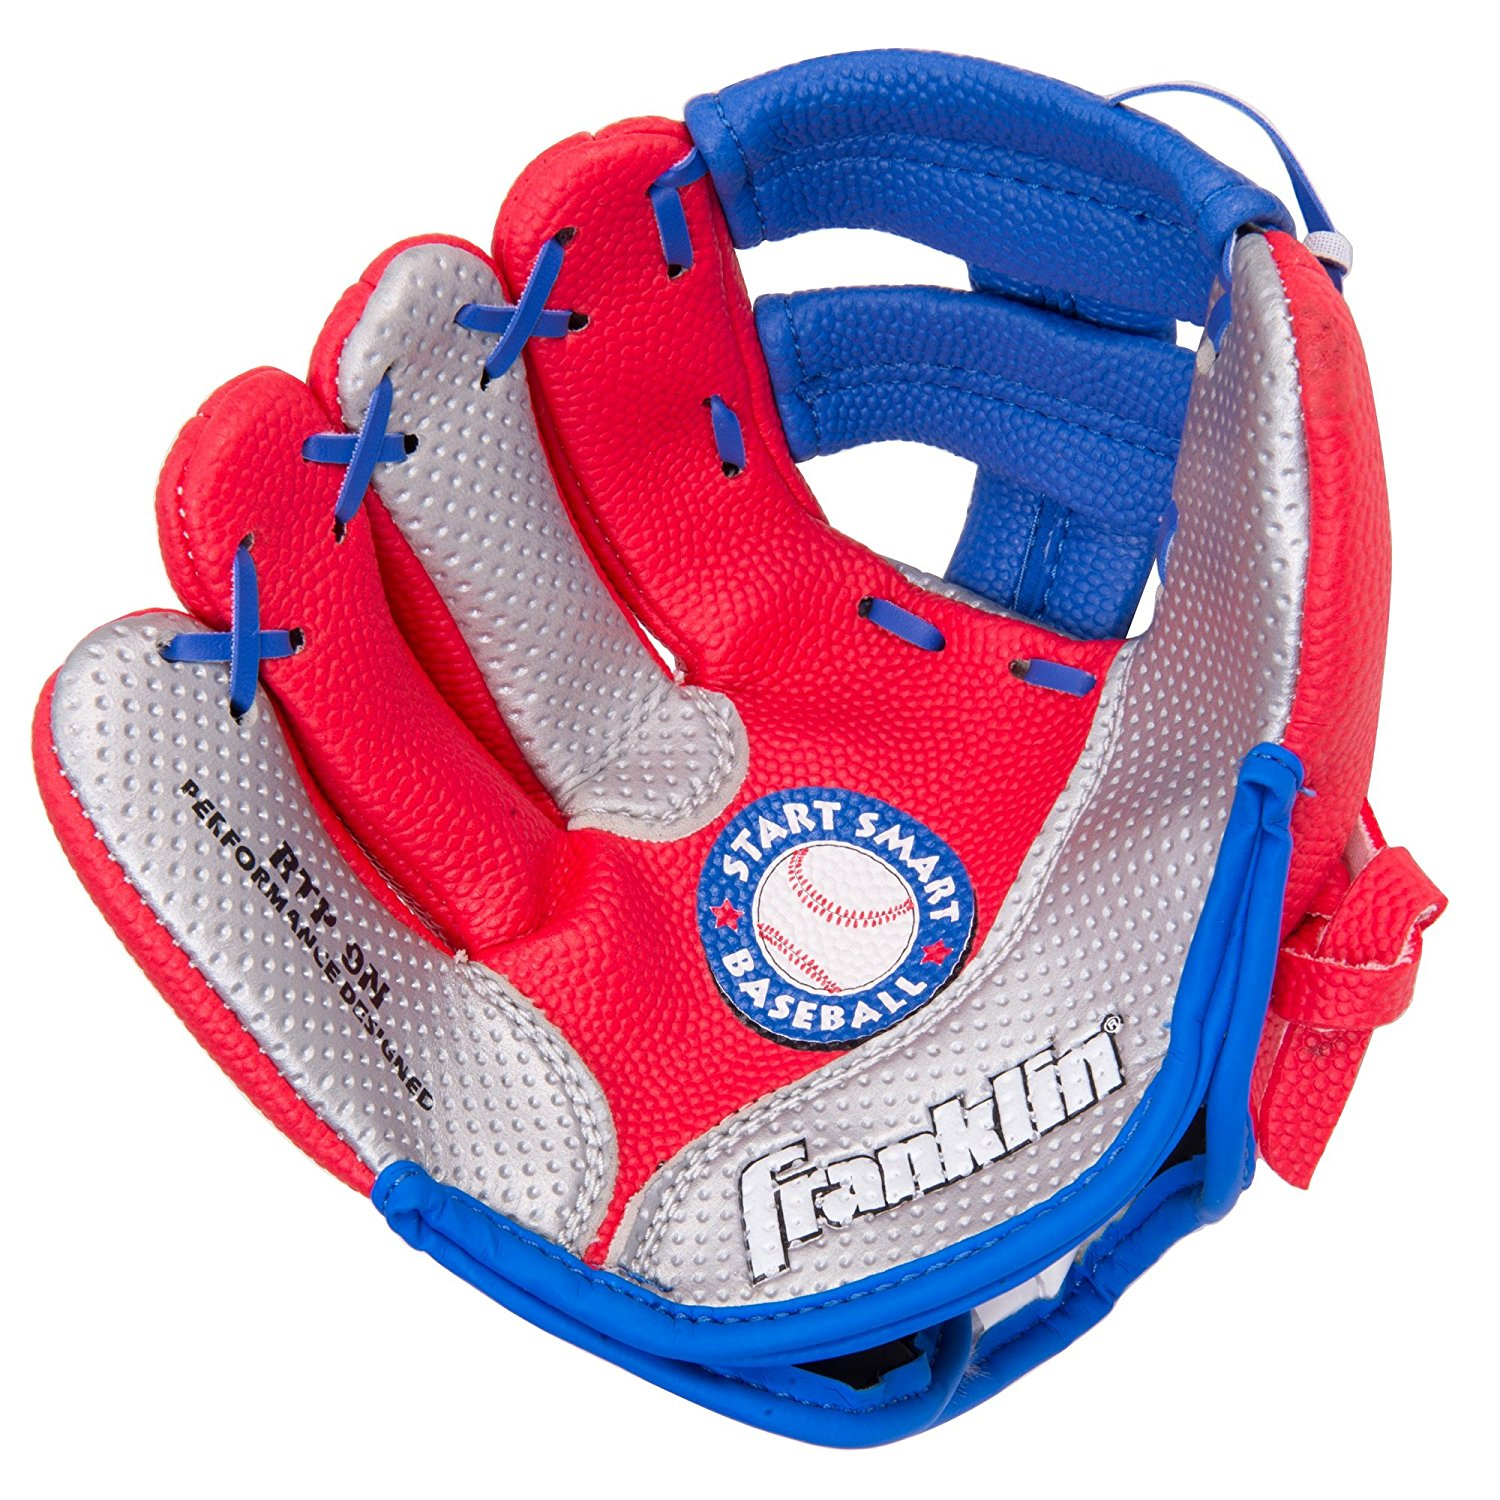 Franklin Sports Air Tech Left Handed Youth Baseball Glove Only $8.63!